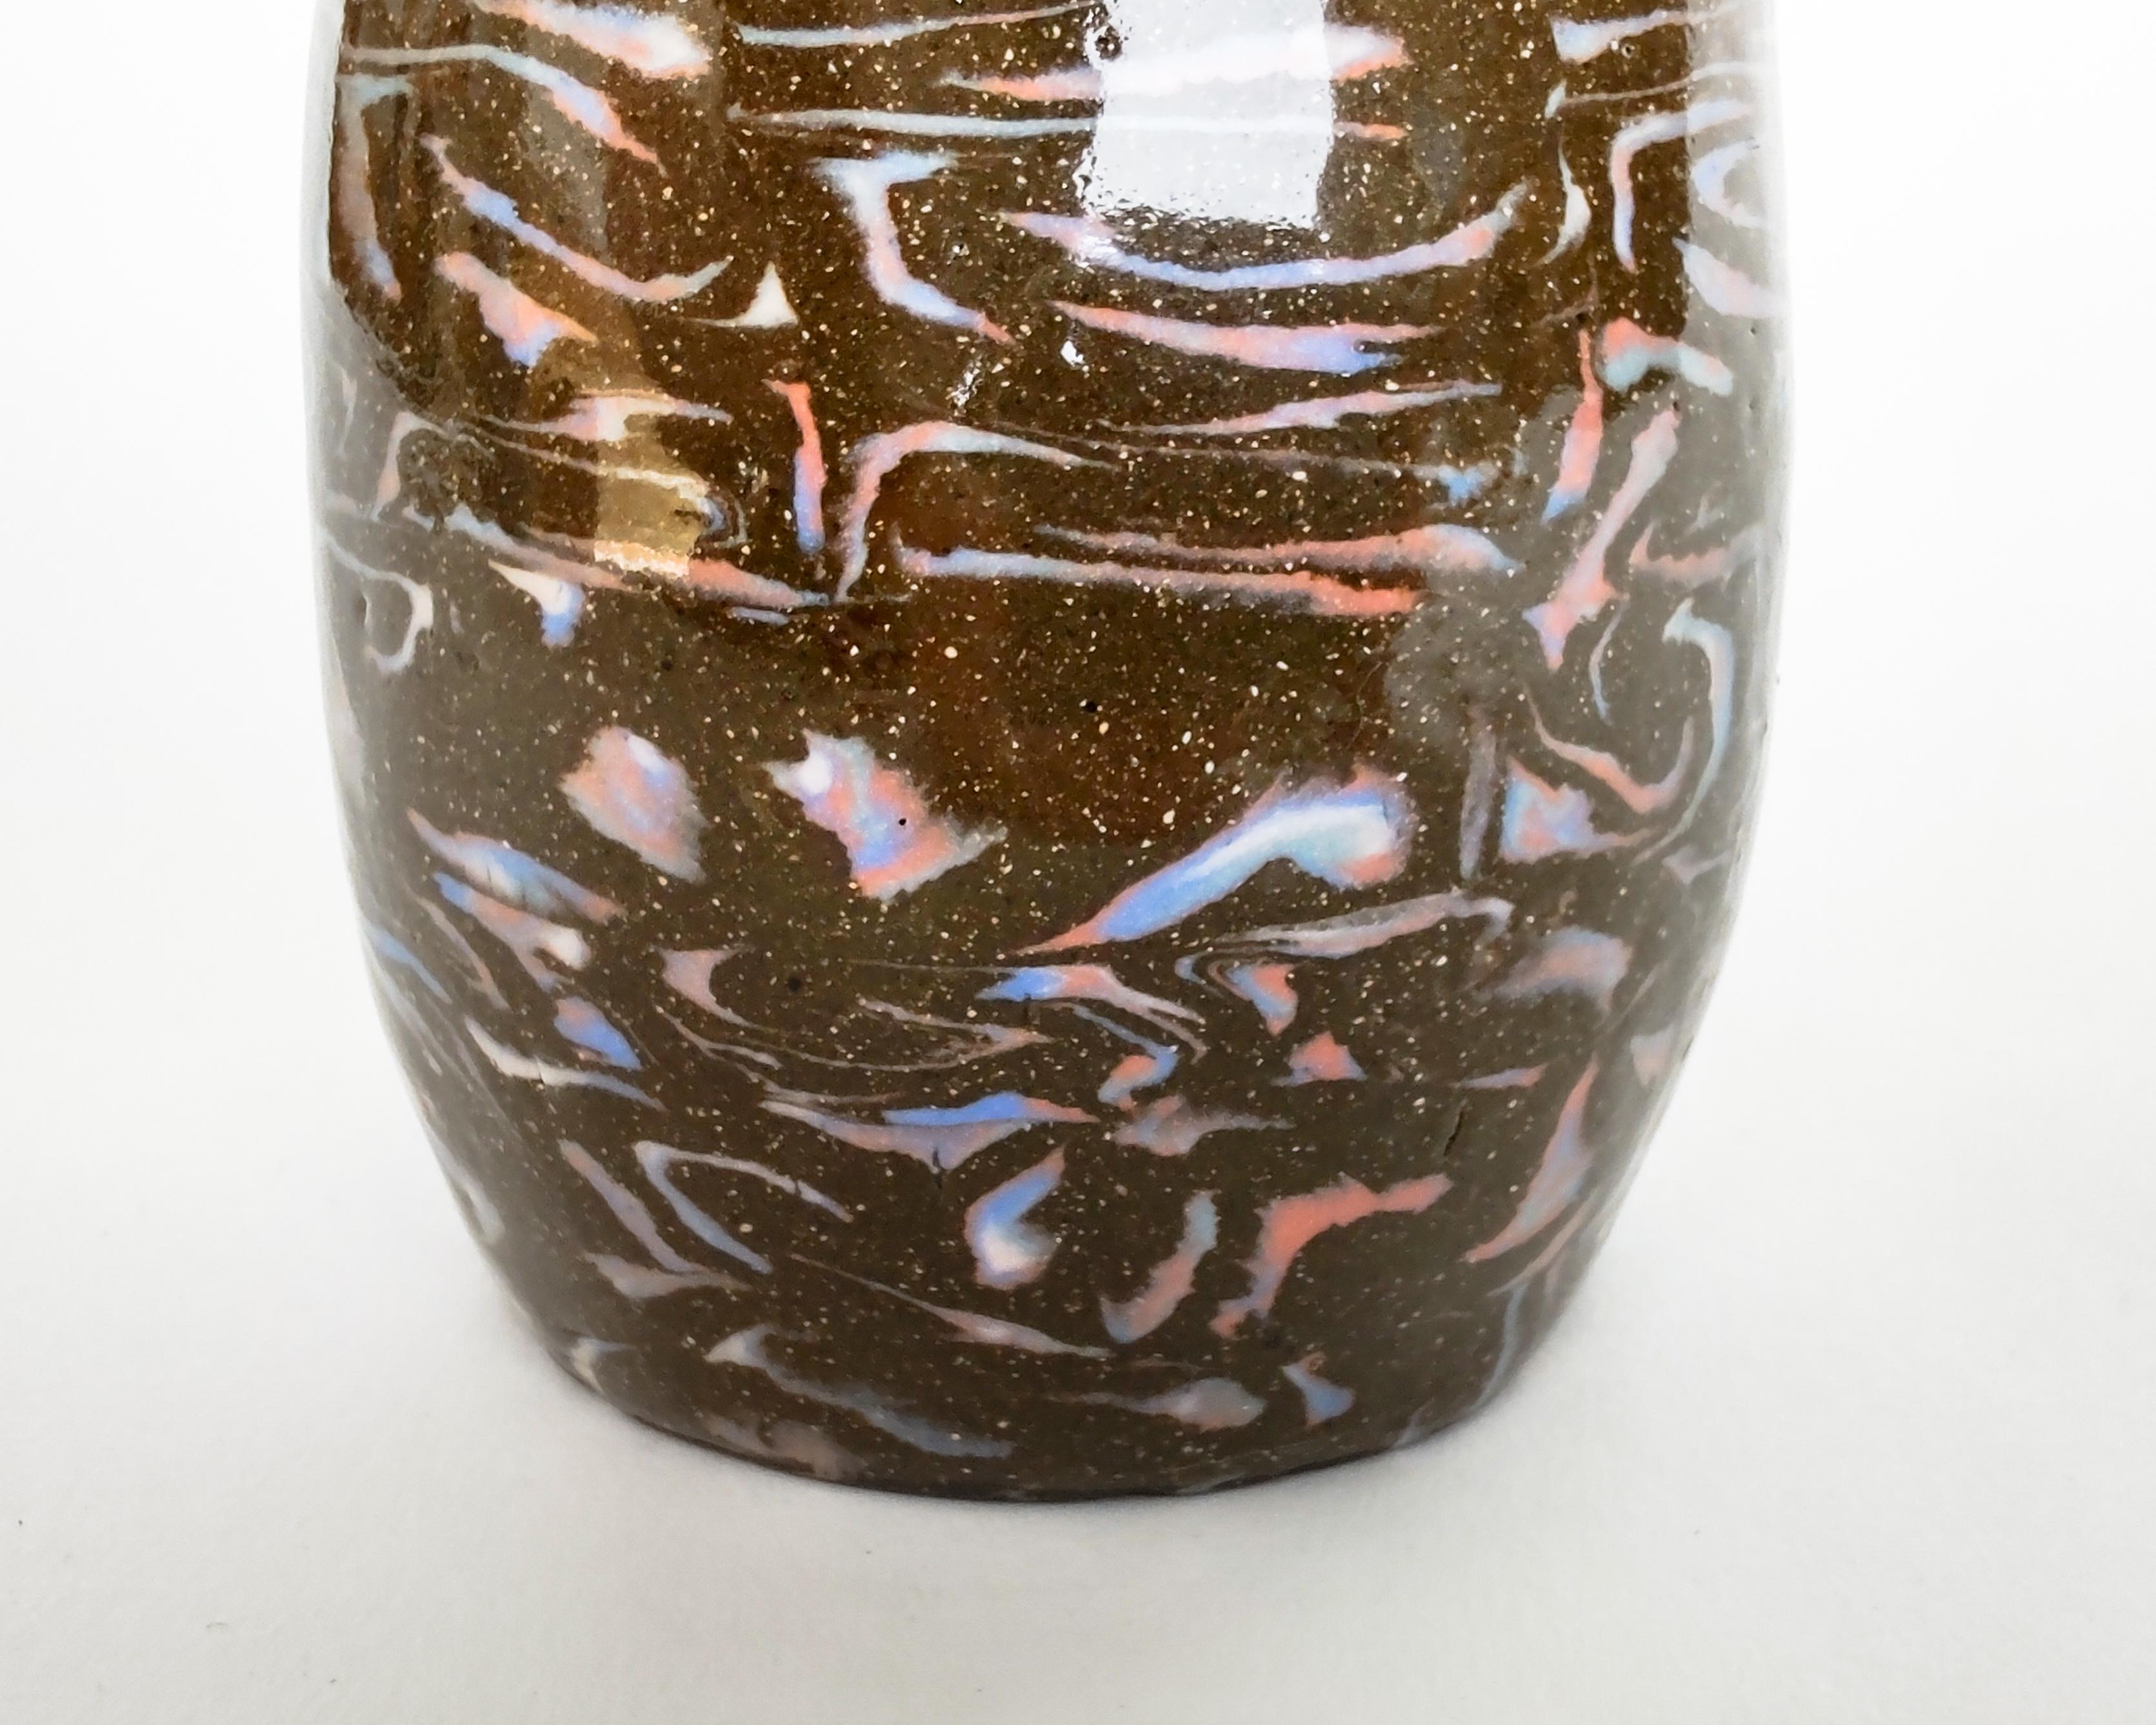 Handmade nerikomi vase with multiple colored clays. Black-brown speckled clay with colorful marbled squiggles integral to the vase. Made and fired in Los Angeles by Fizzy Ceramics in 2022. Glazed clear on the outside and inside, the black clay turns